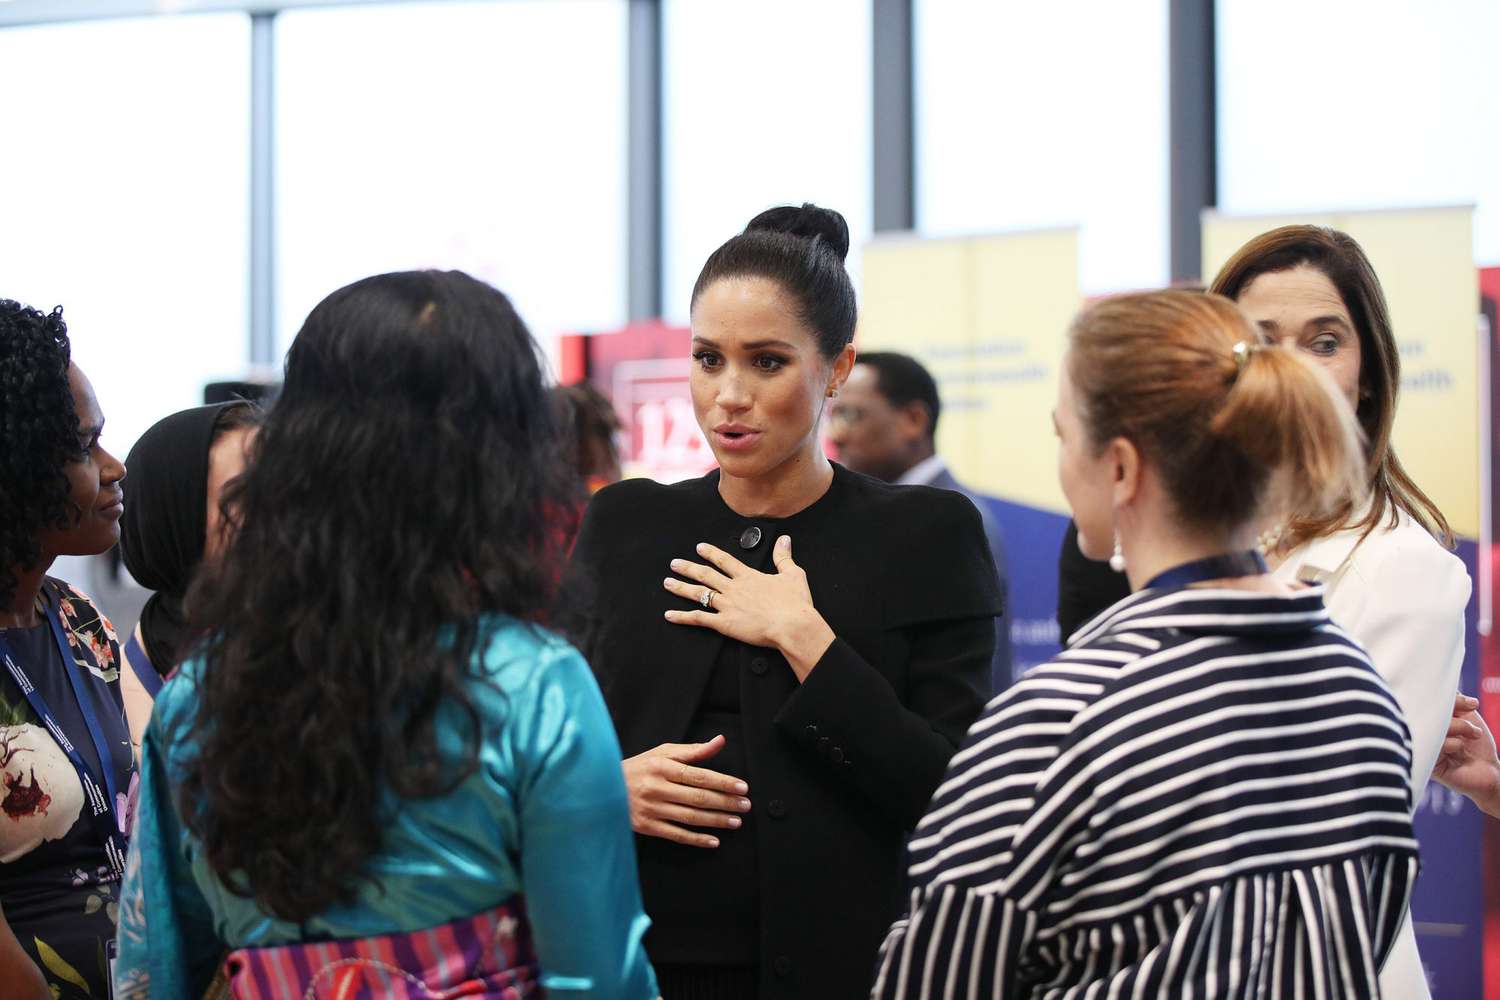 Meghan Duchess of Sussex visit to the Association of Commonwealth Universities, London, UK - 31 Jan 2019